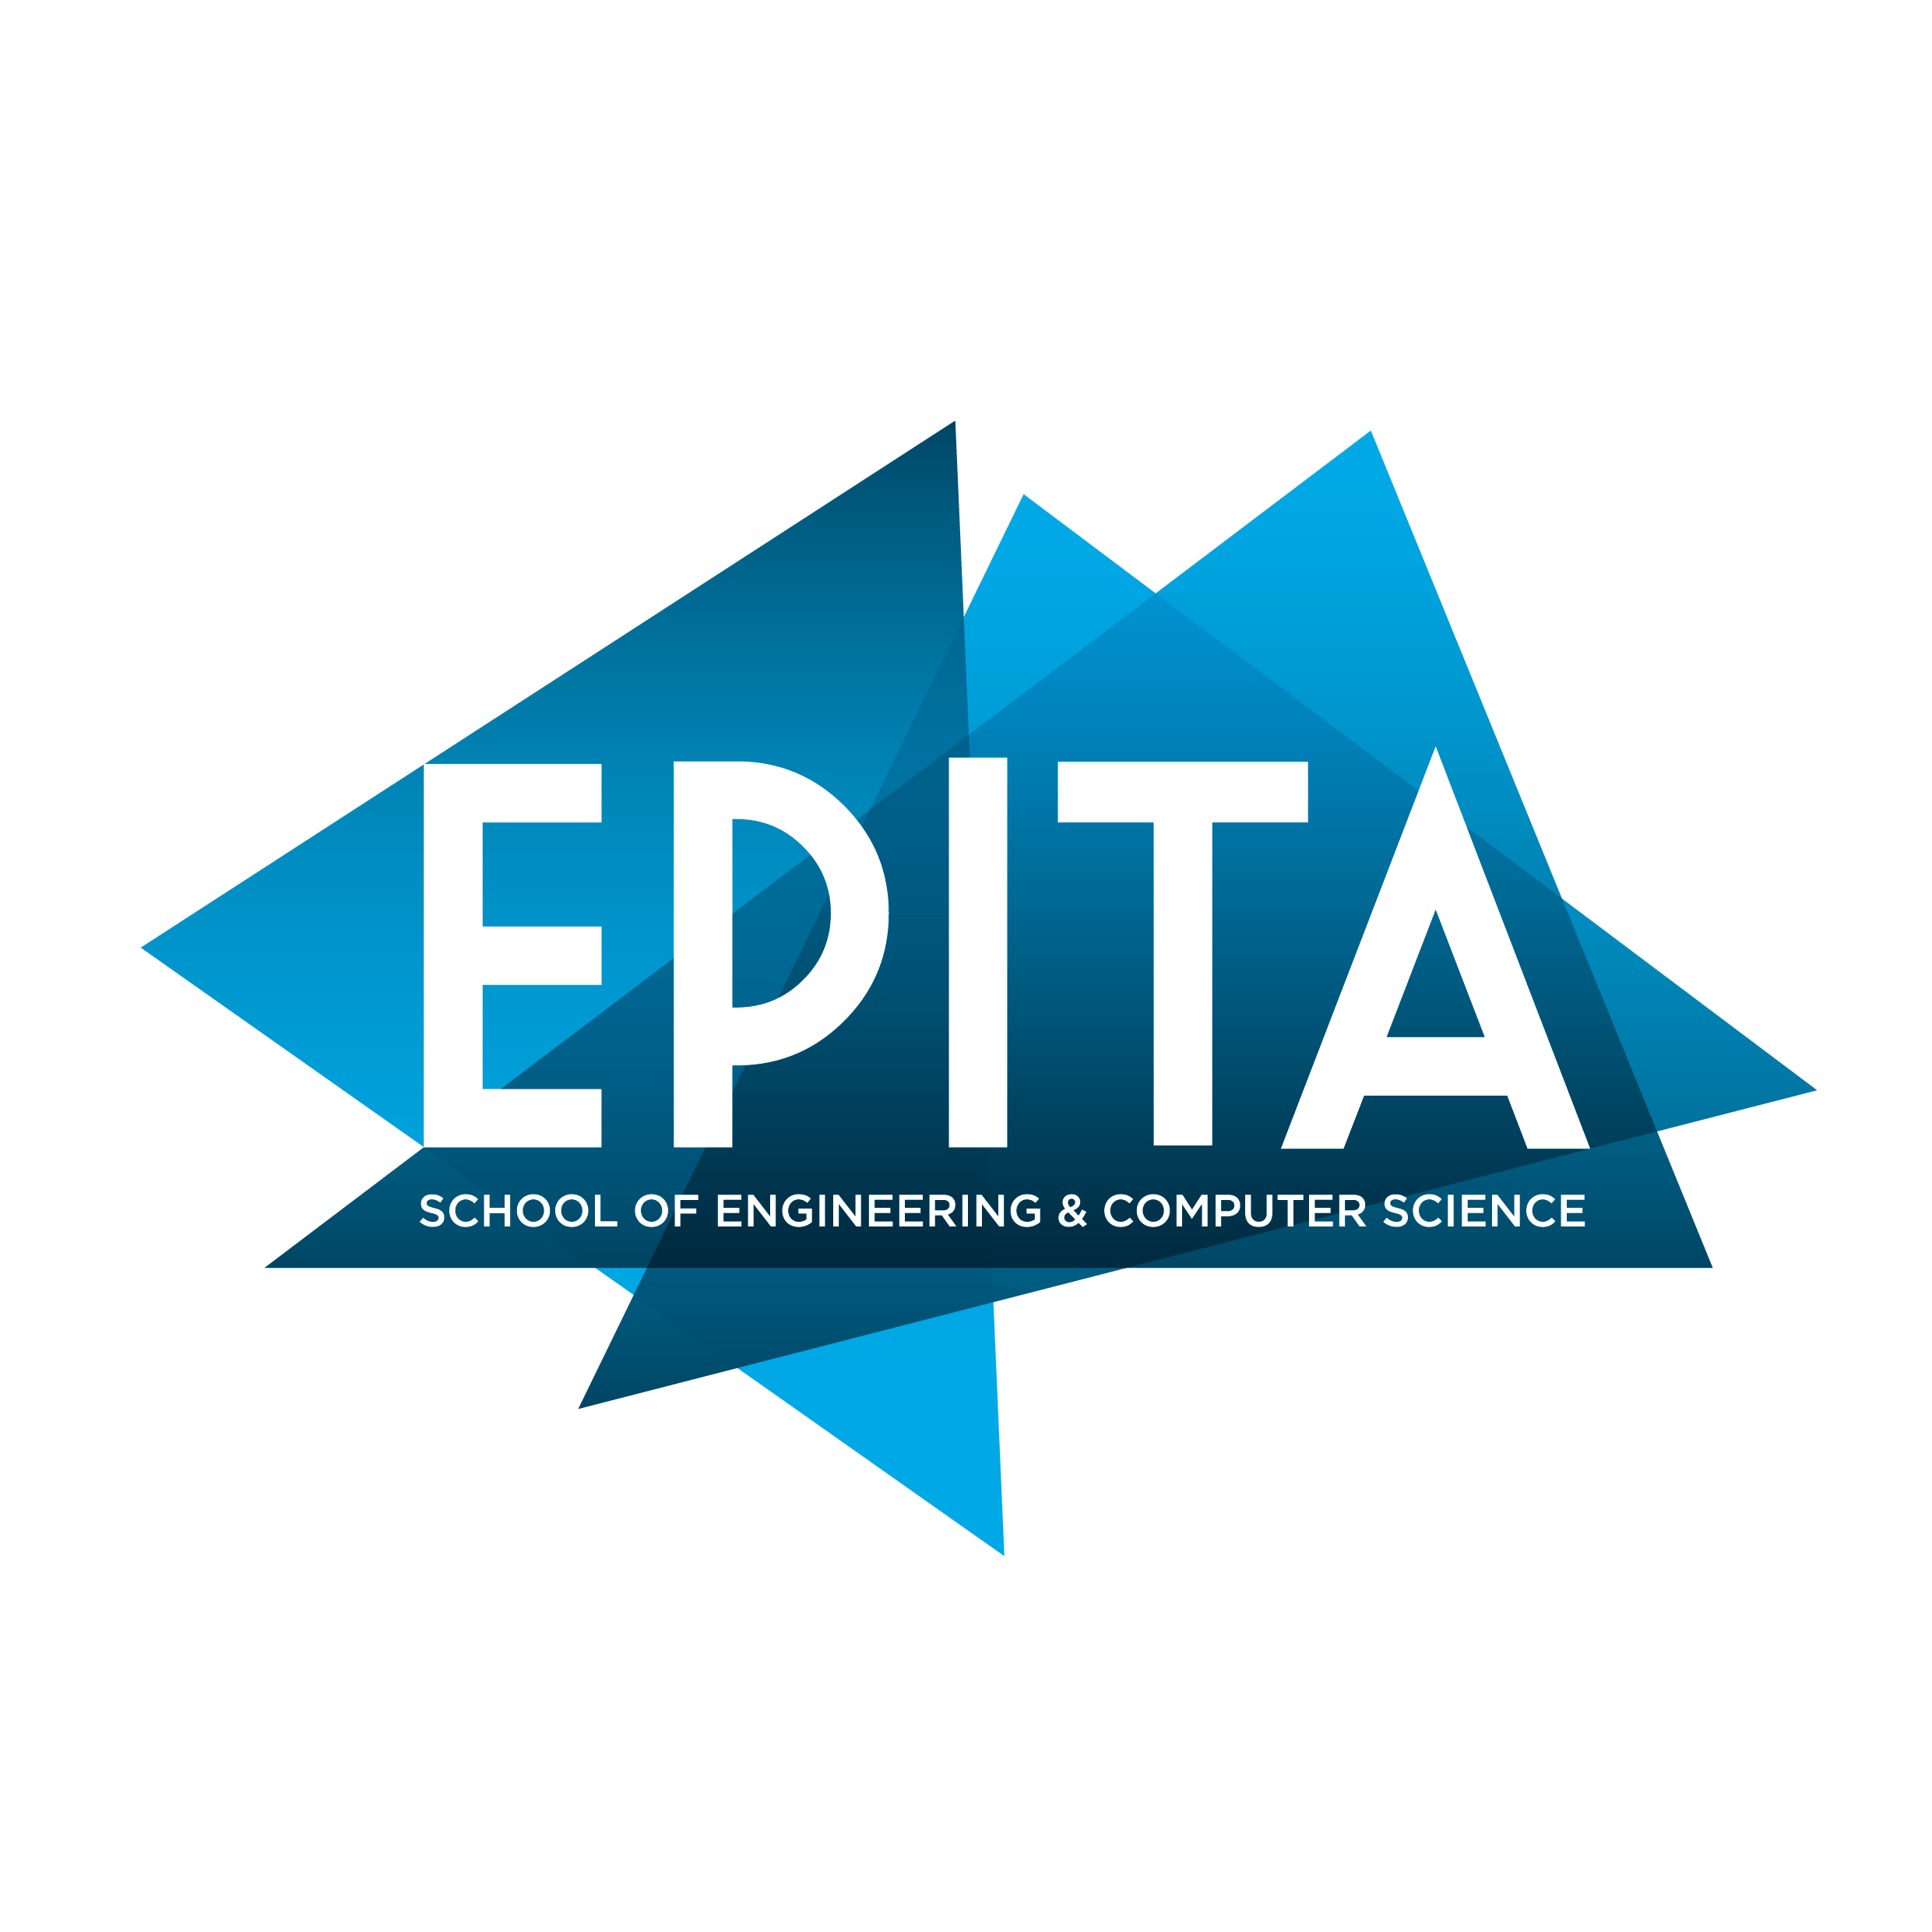 Study in EPITA School of Engineering and Computer Science with Scholarship